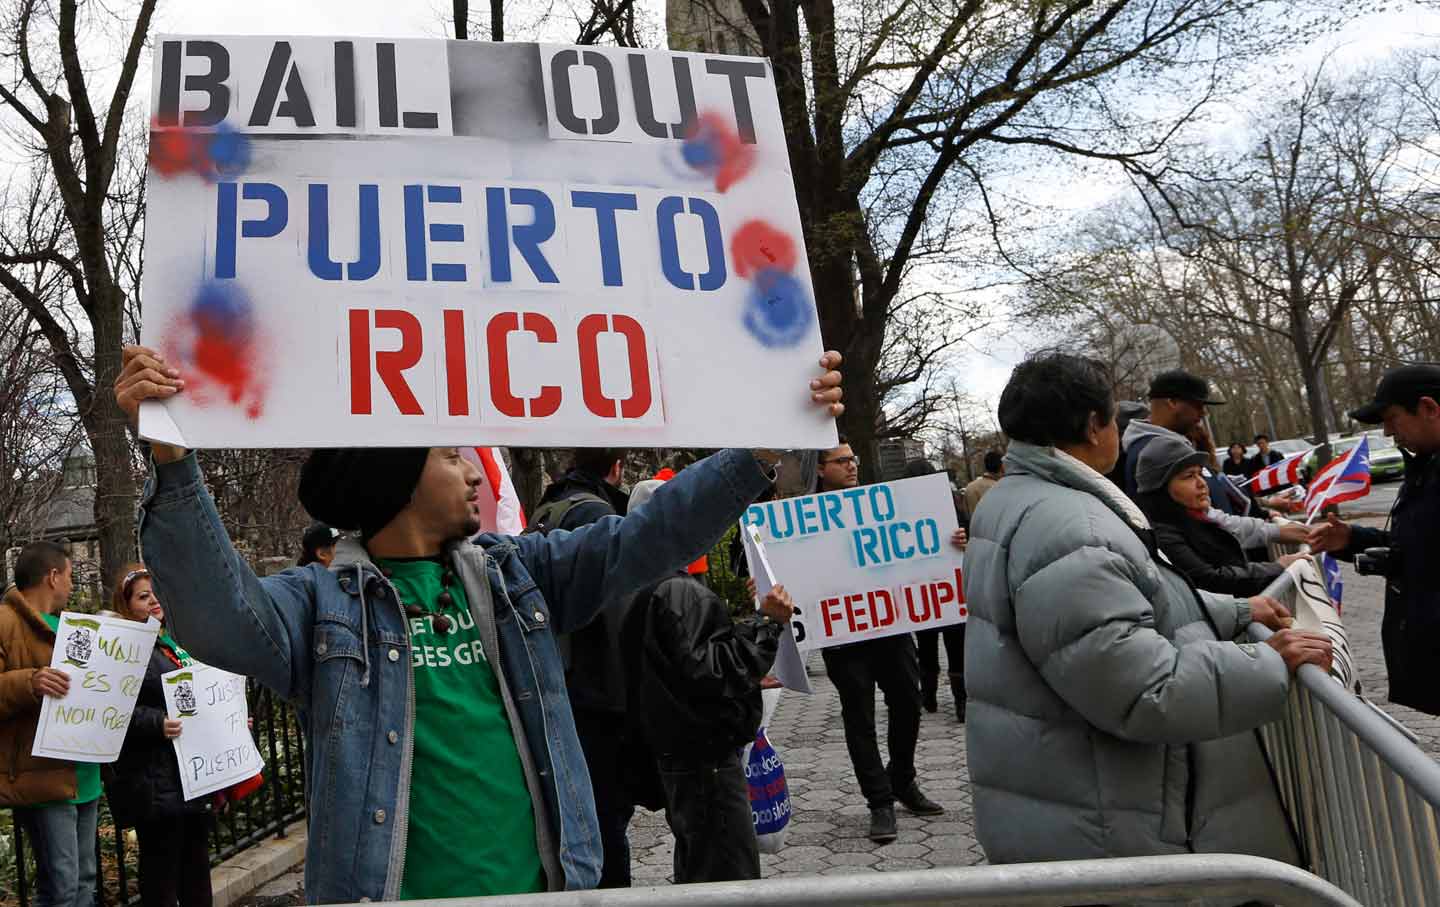 A demonstrator supports bailing out Puerto Rico